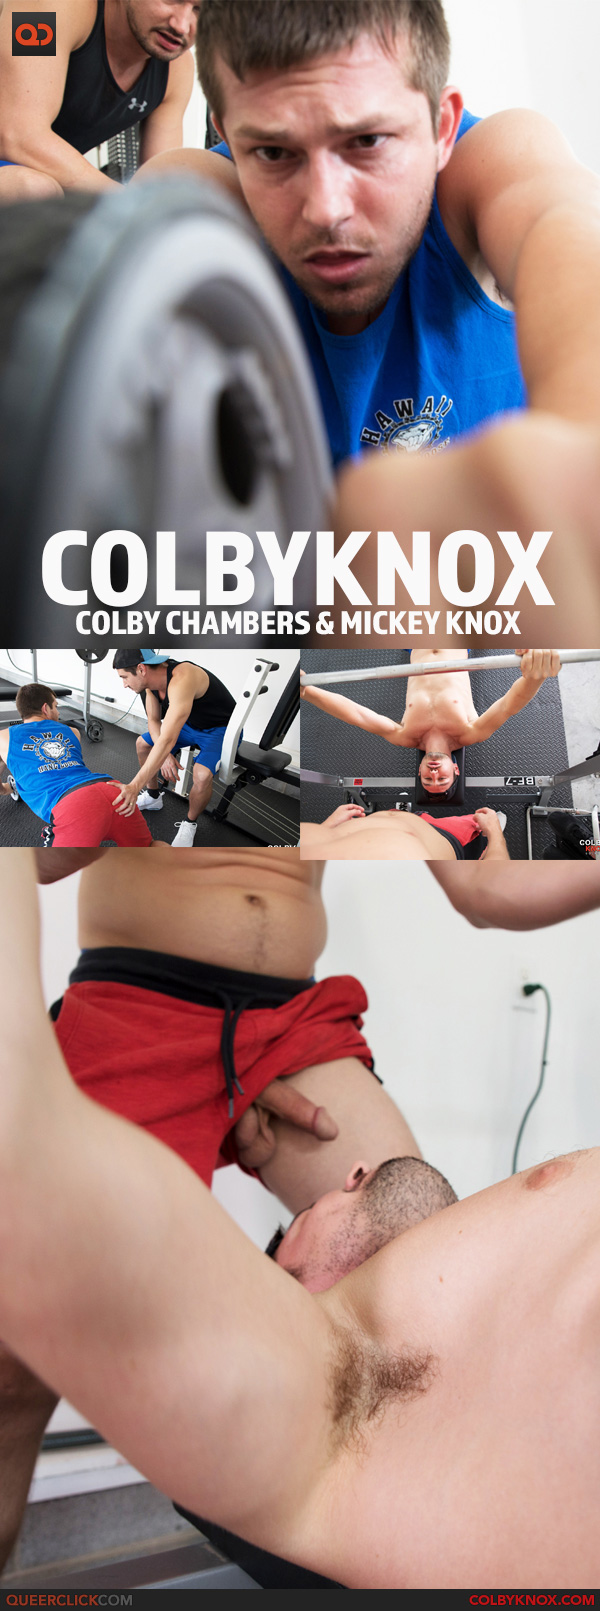 Colby Knox: Colby Chambers & Mickey Knox